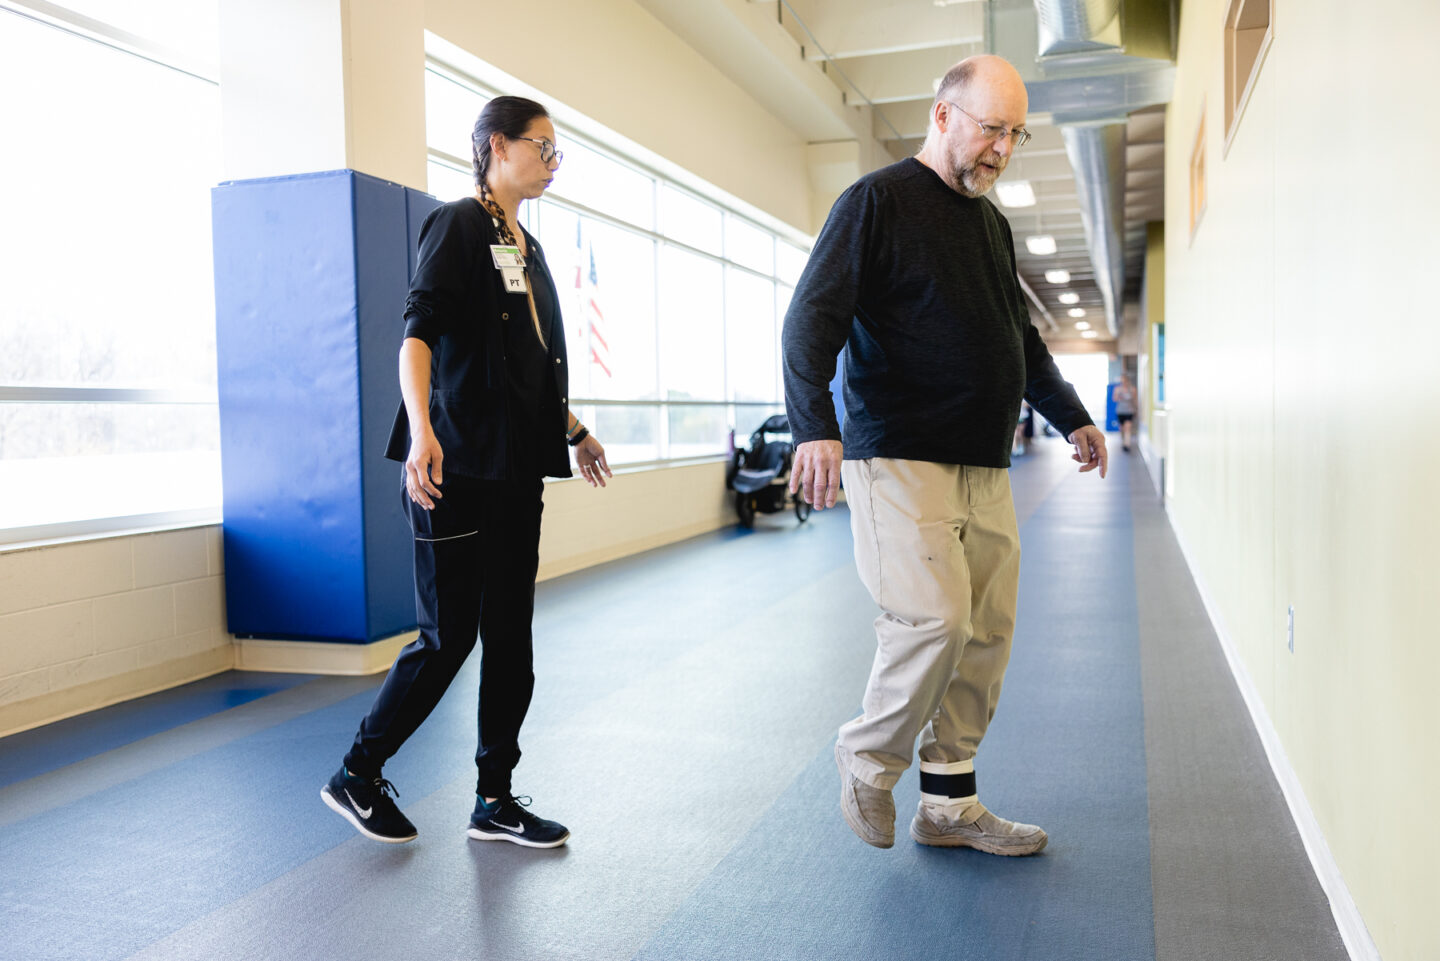 Senior patient walking with the support of a physical therapist for sports injury rehabilitation.